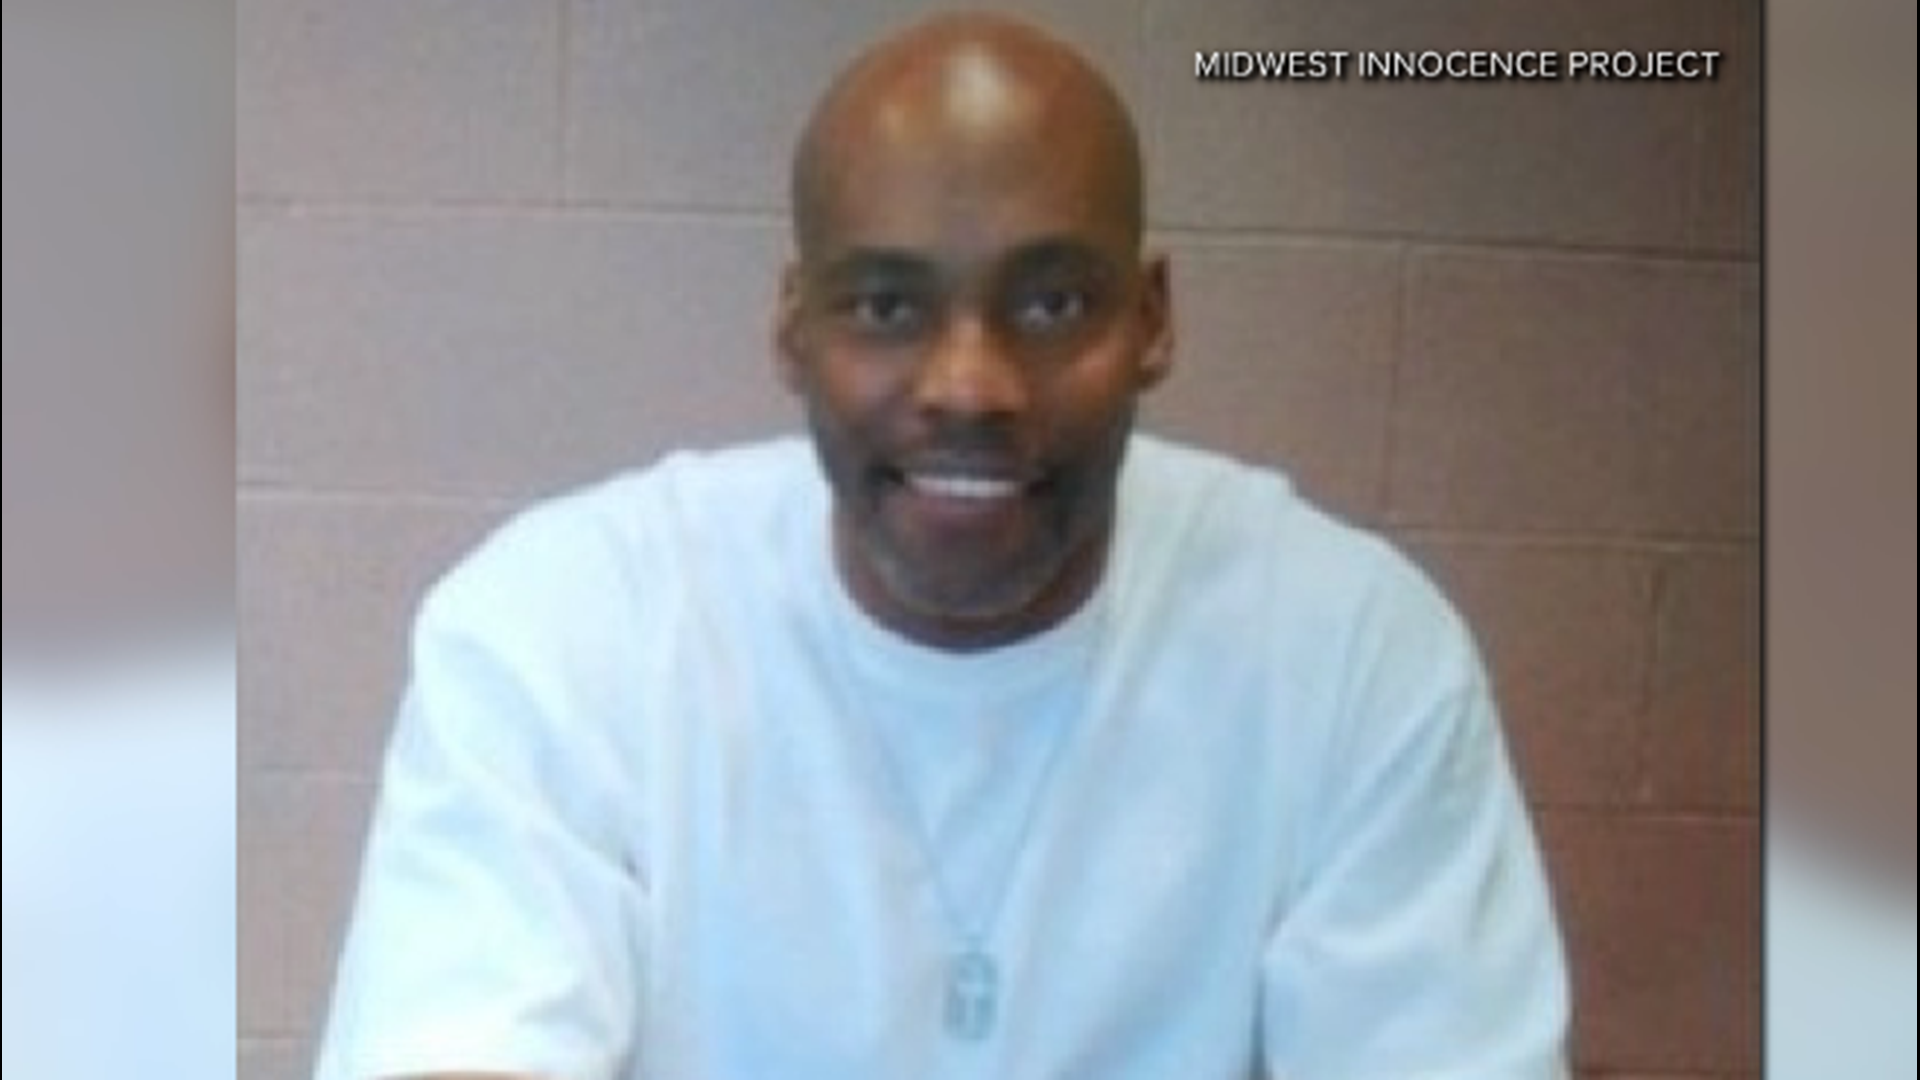 A hearing began Monday in St. Louis to decide if the murder conviction for Lamar Johnson should be thrown out.